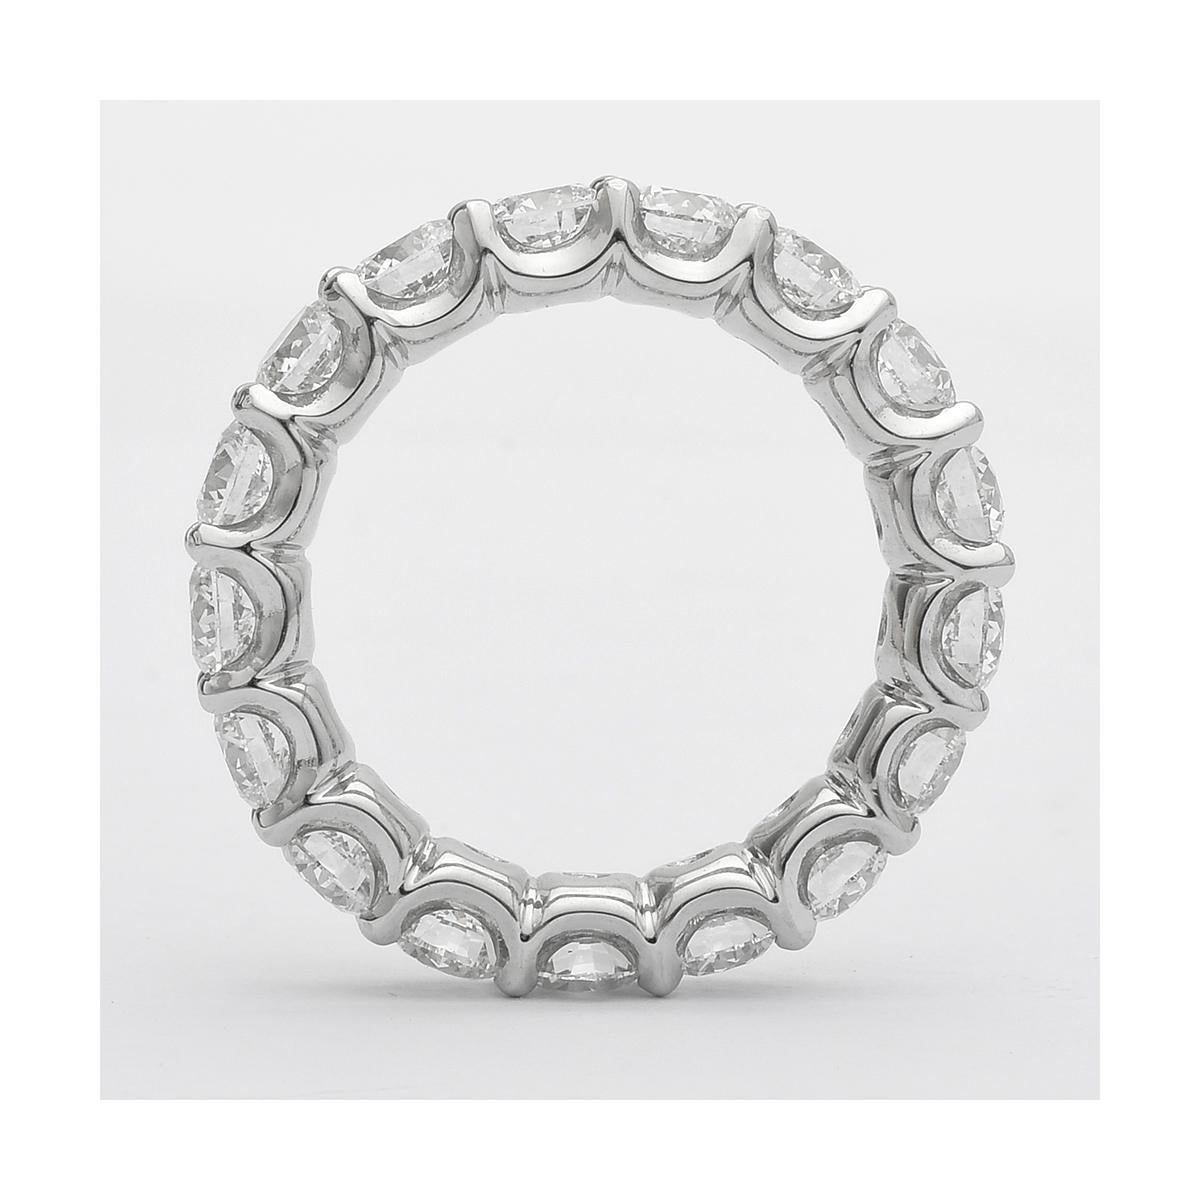 Diamond eternity band ring, showcasing fine near-colorless round brilliant-cut diamonds prong-set in a platinum mounting with a 'U'-shaped sculpted-edge.

Seventeen diamonds weighing 4.06 total carats
Size 5.75